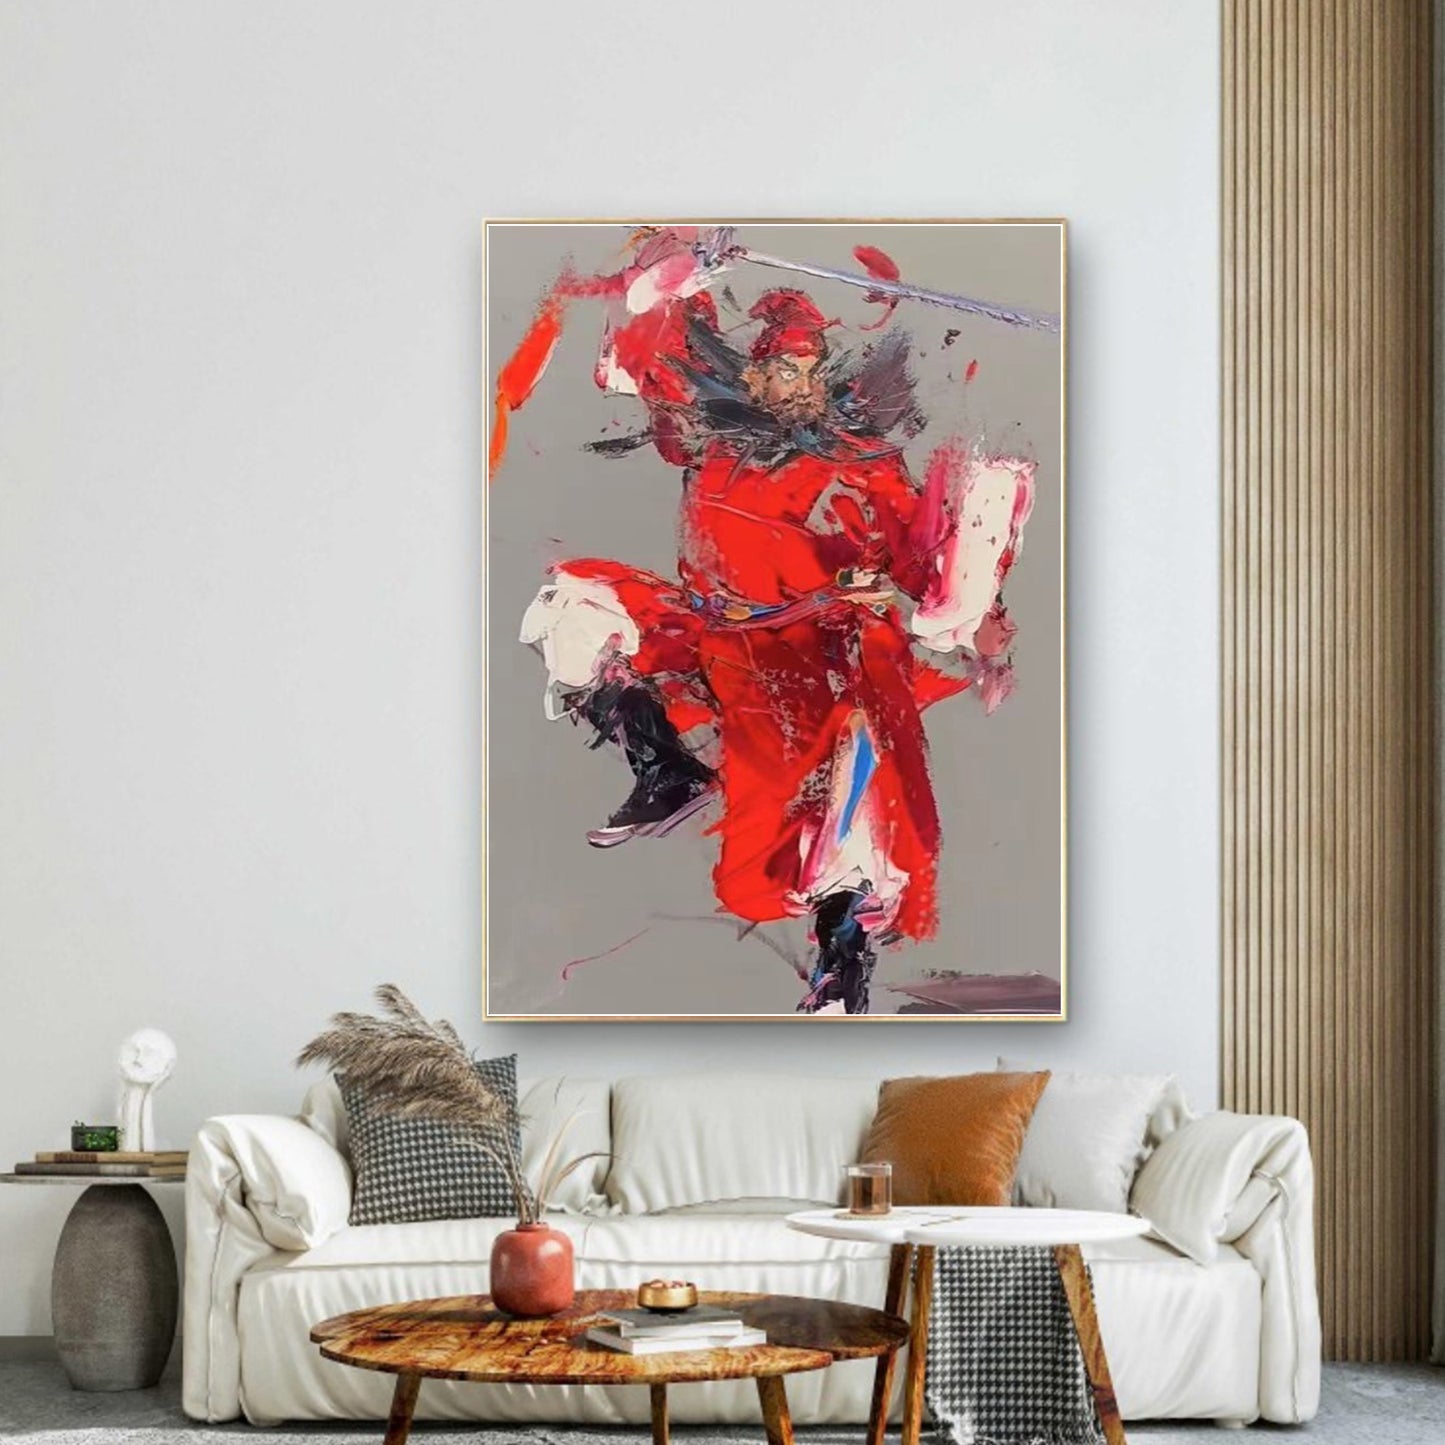 Large Chinese Opera oil painting, heavy textureoil painting, large abstract original palette knife painting , portrait painting, Gift idea